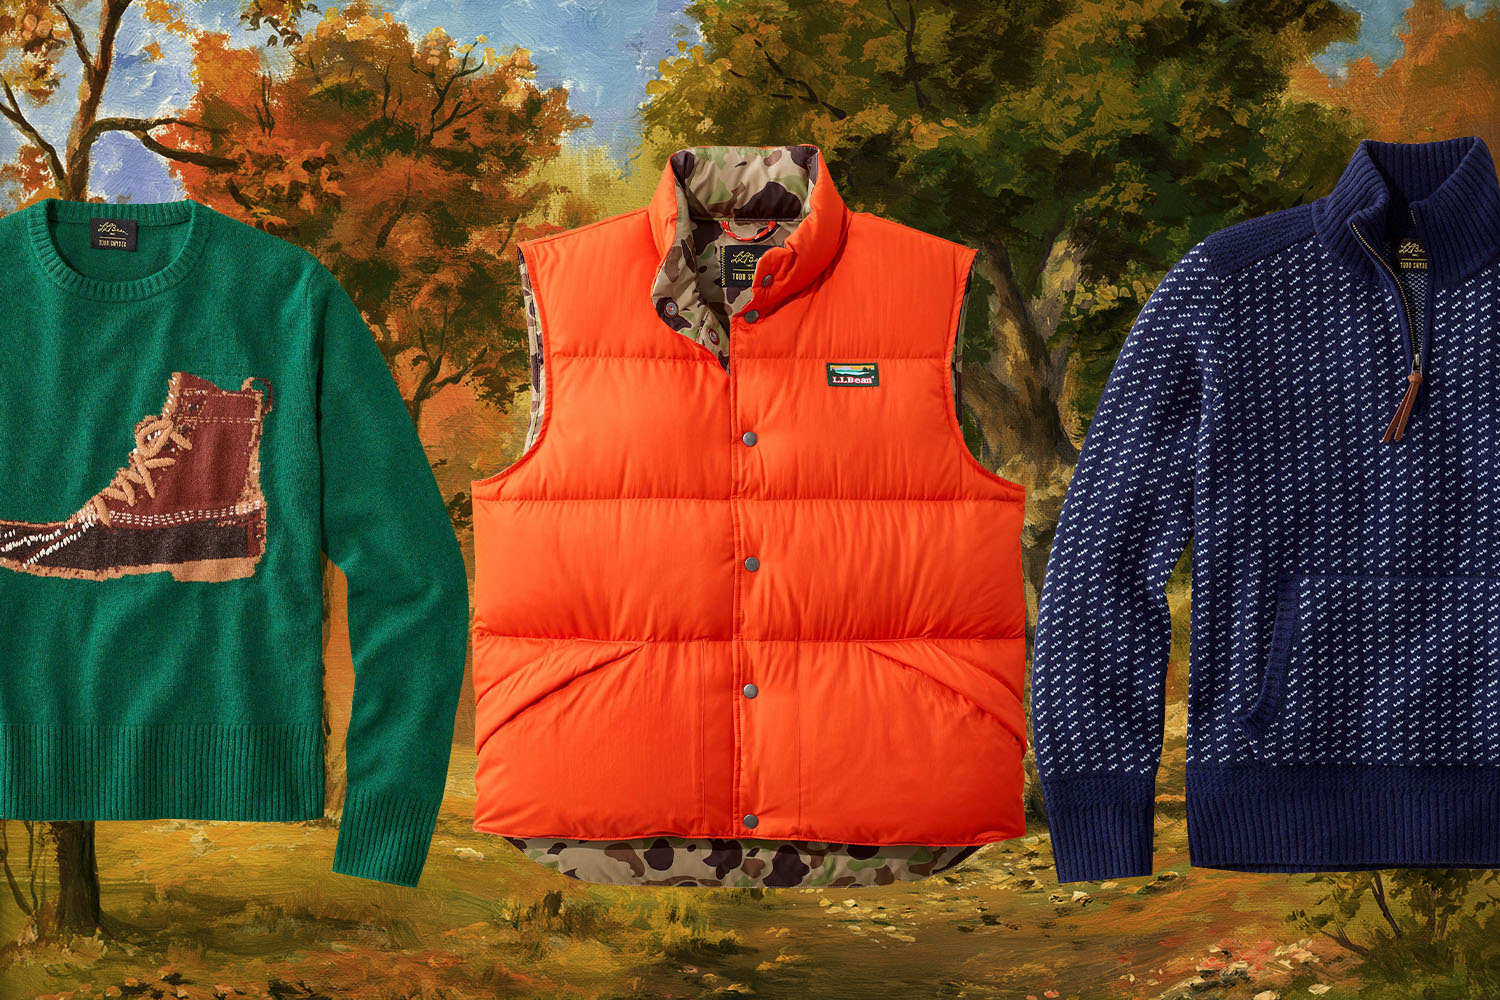 Everything You Should Buy From the Latest Todd Snyder x L.L.Bean